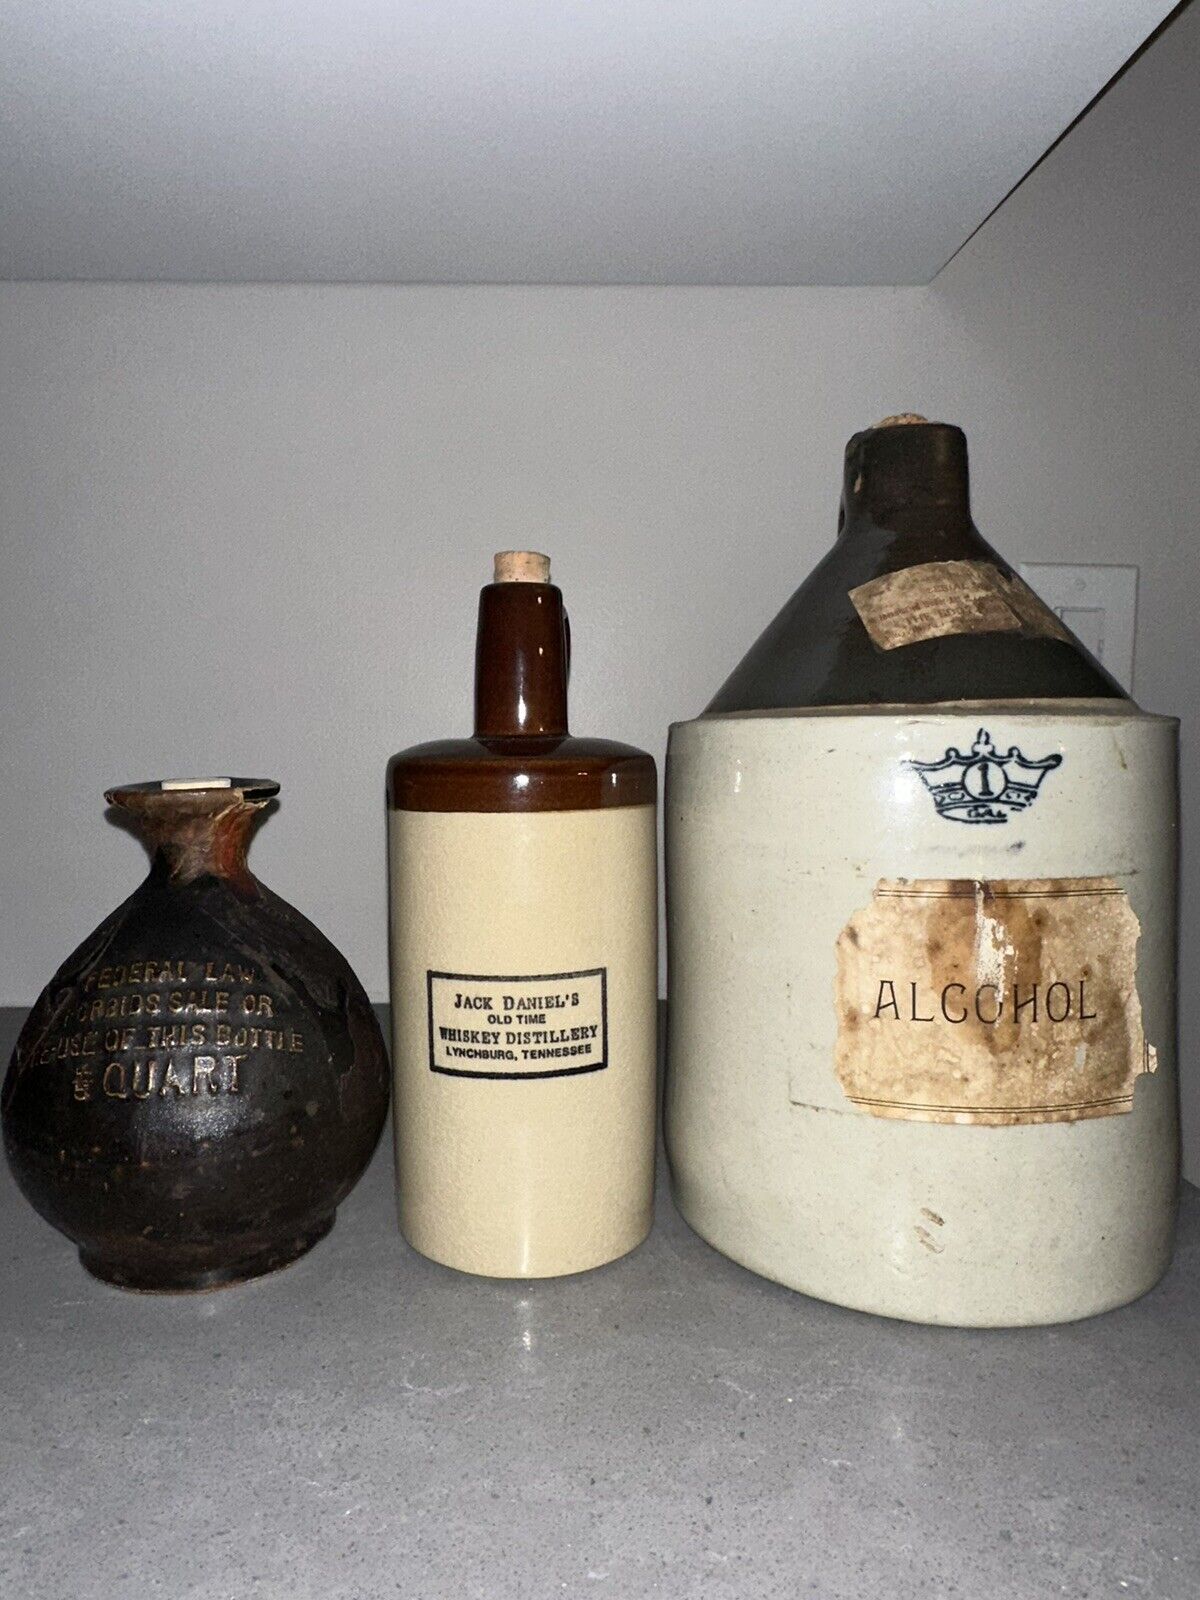 Rare Vintage Assortment of Bottles and Jugs with Original Cork